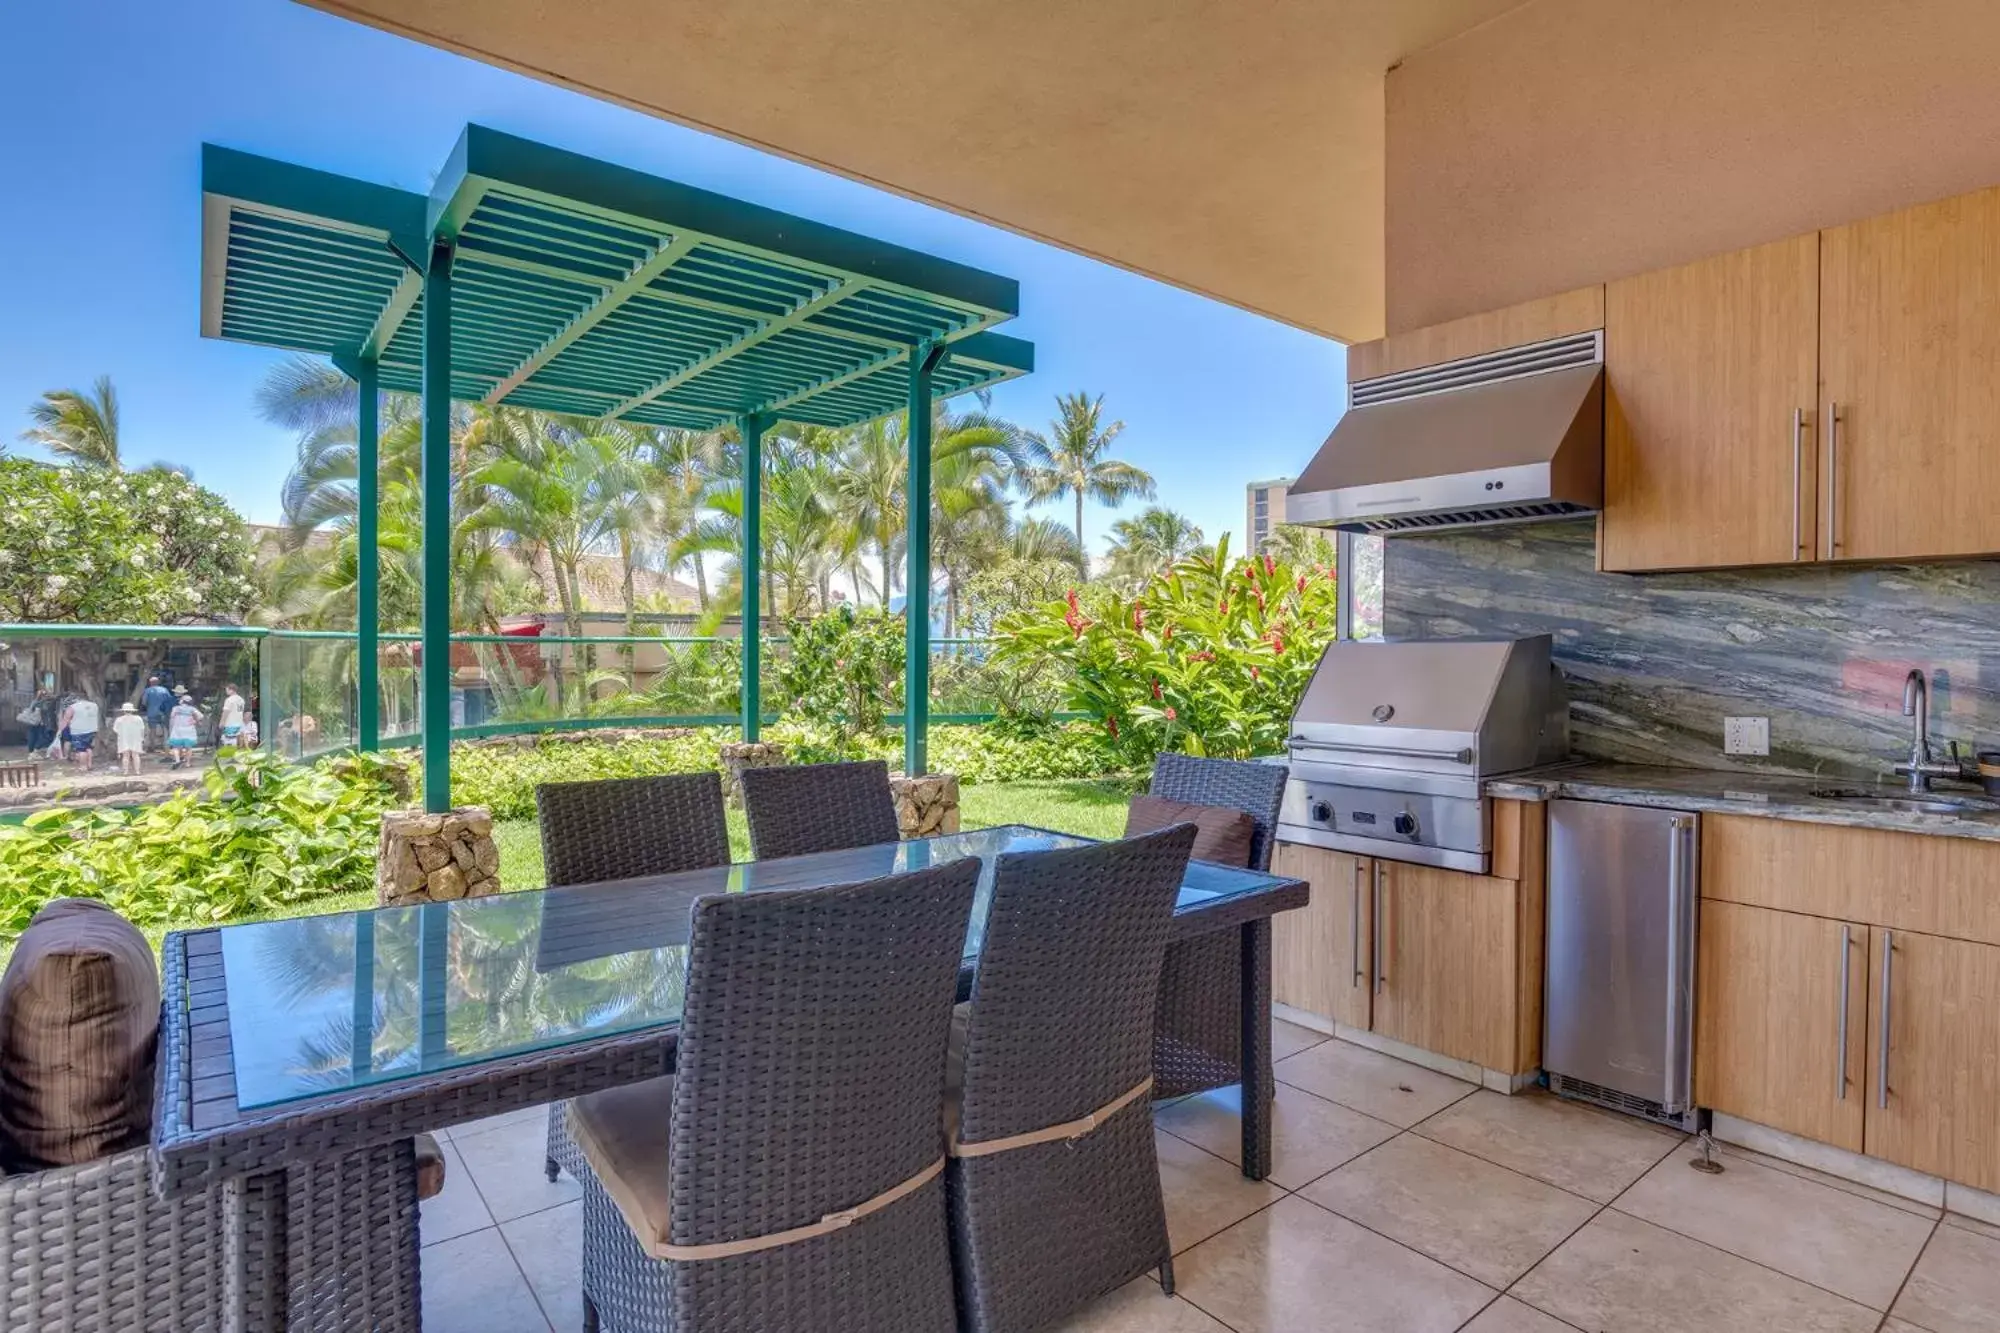 3 Bedroom 3 Bath Alii Suite in OUTRIGGER Honua Kai Resort and Spa